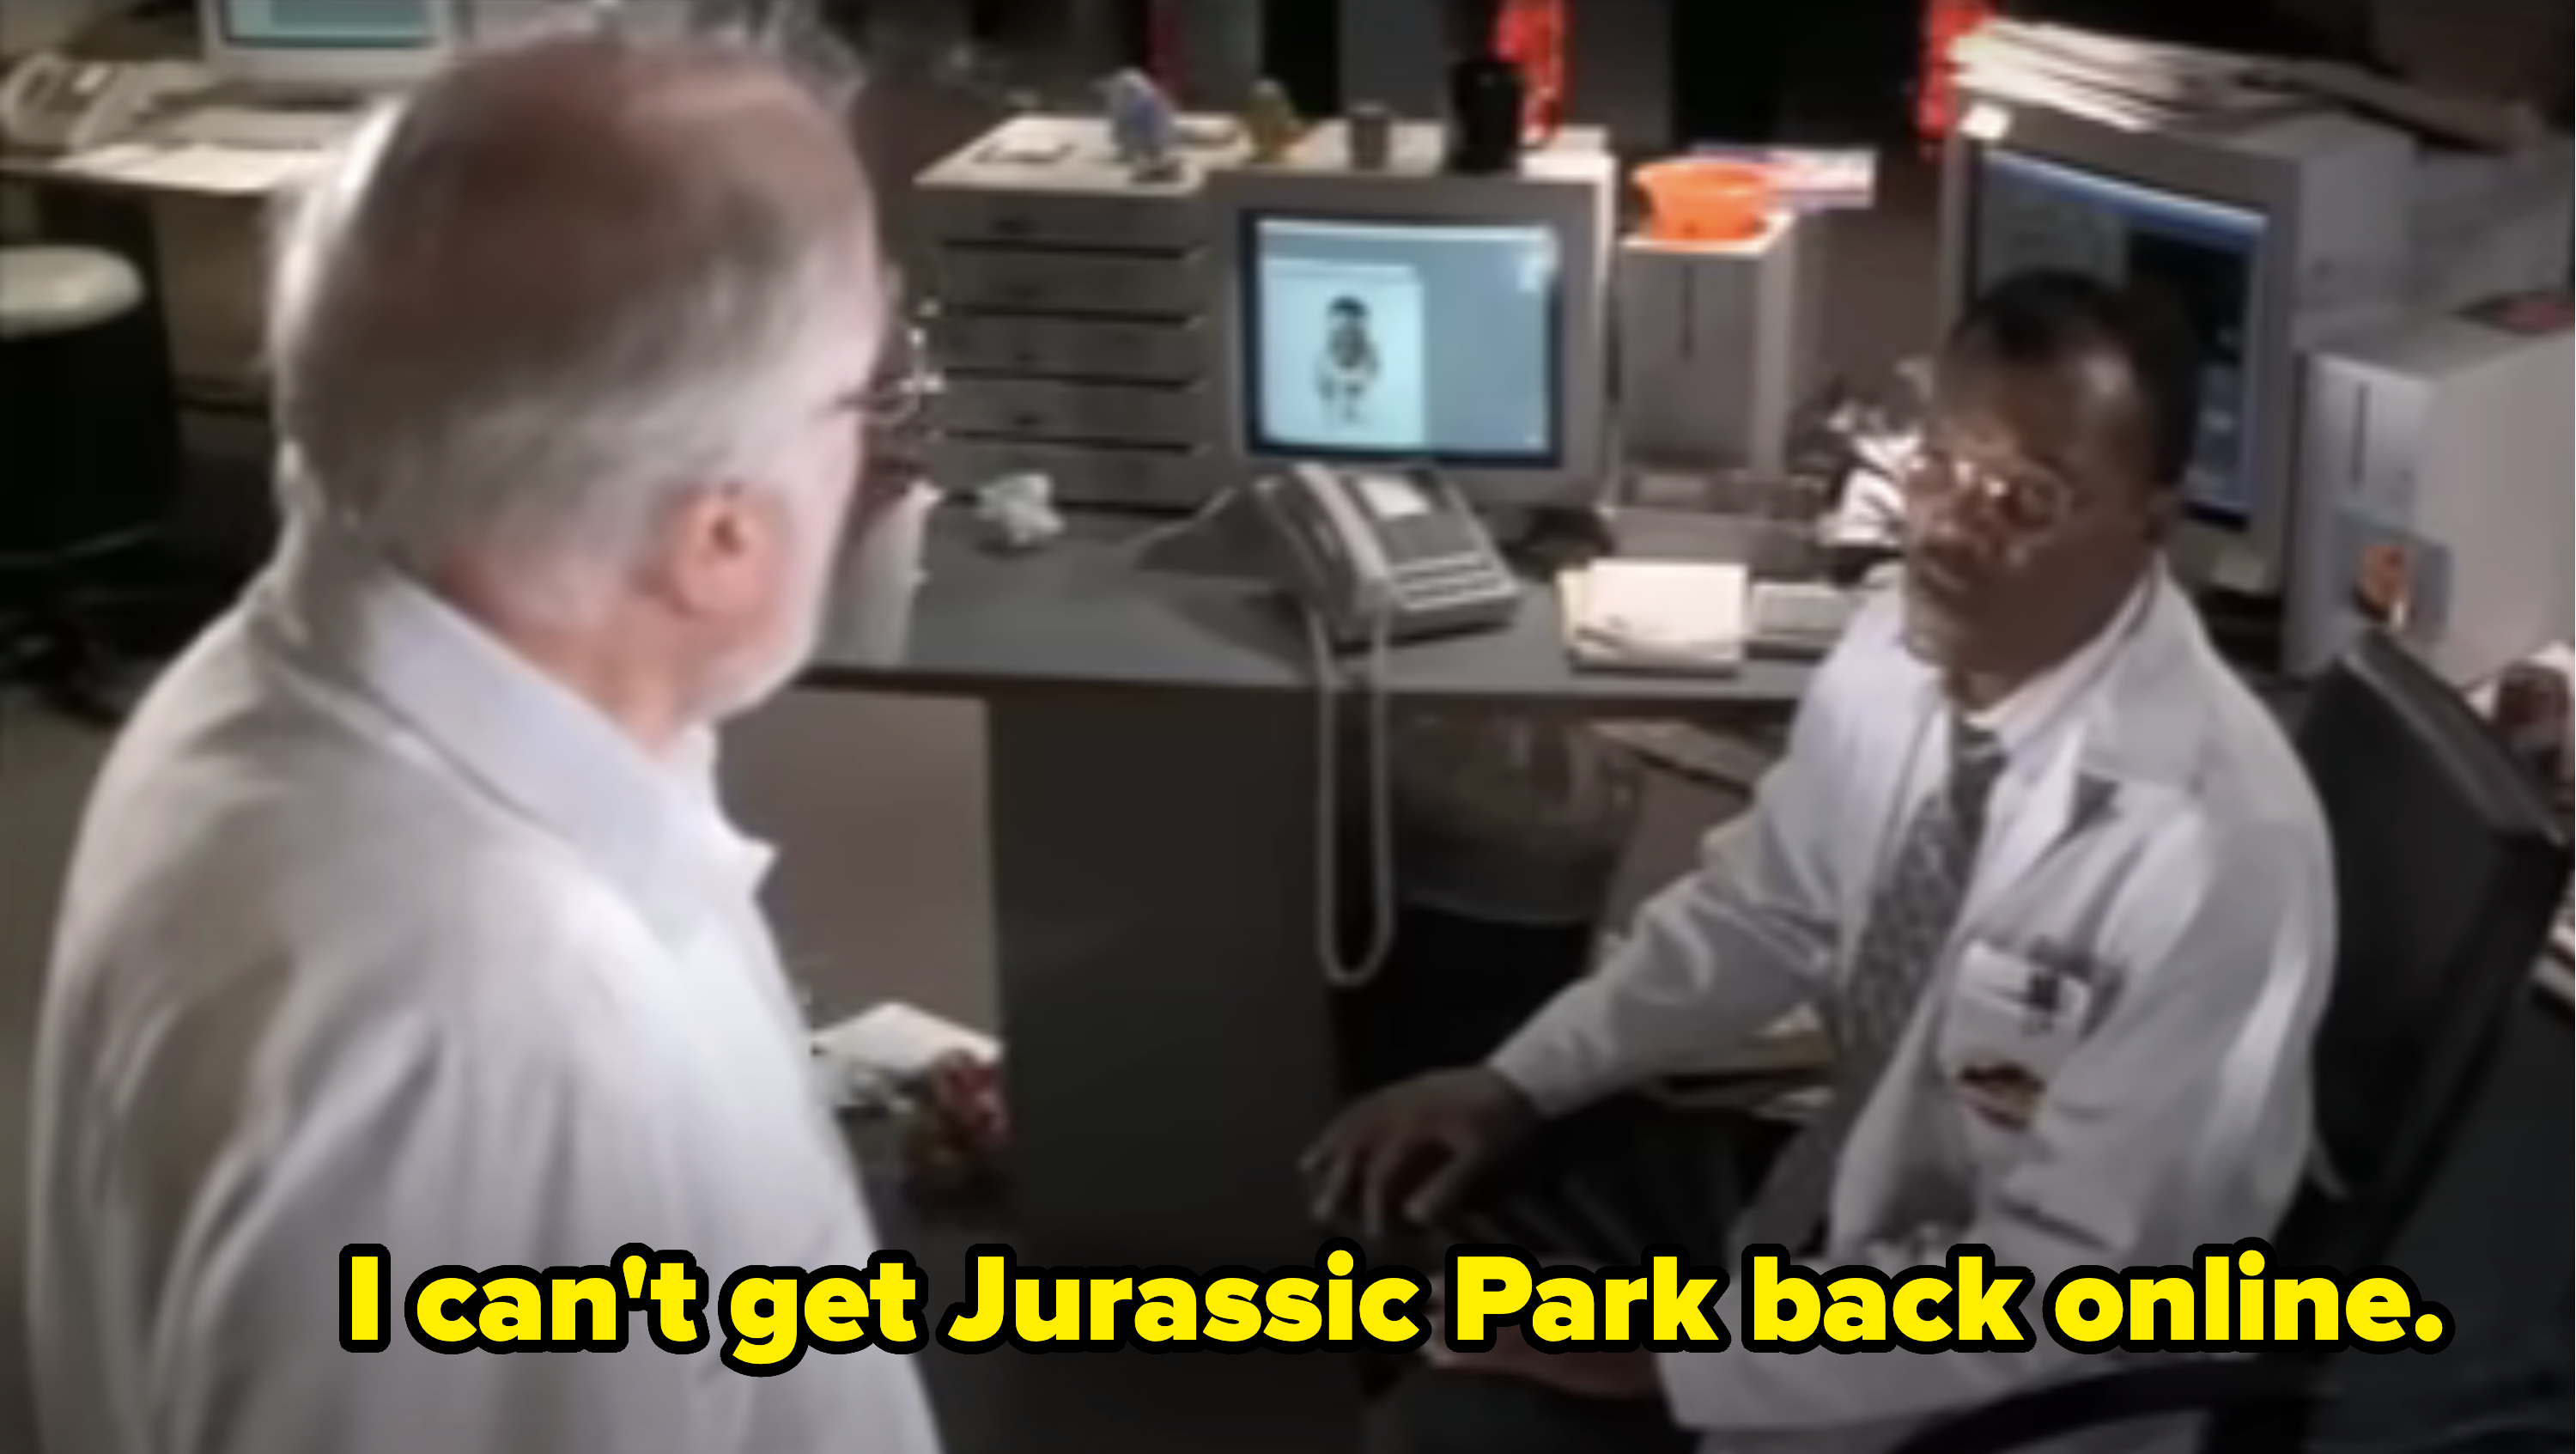 Two men in a laboratory setting, one seated at a desk with a computer showing a face, the other standing; Samuel L Jackson&#x27;s character says he can&#x27;t get Jurassic Park back online